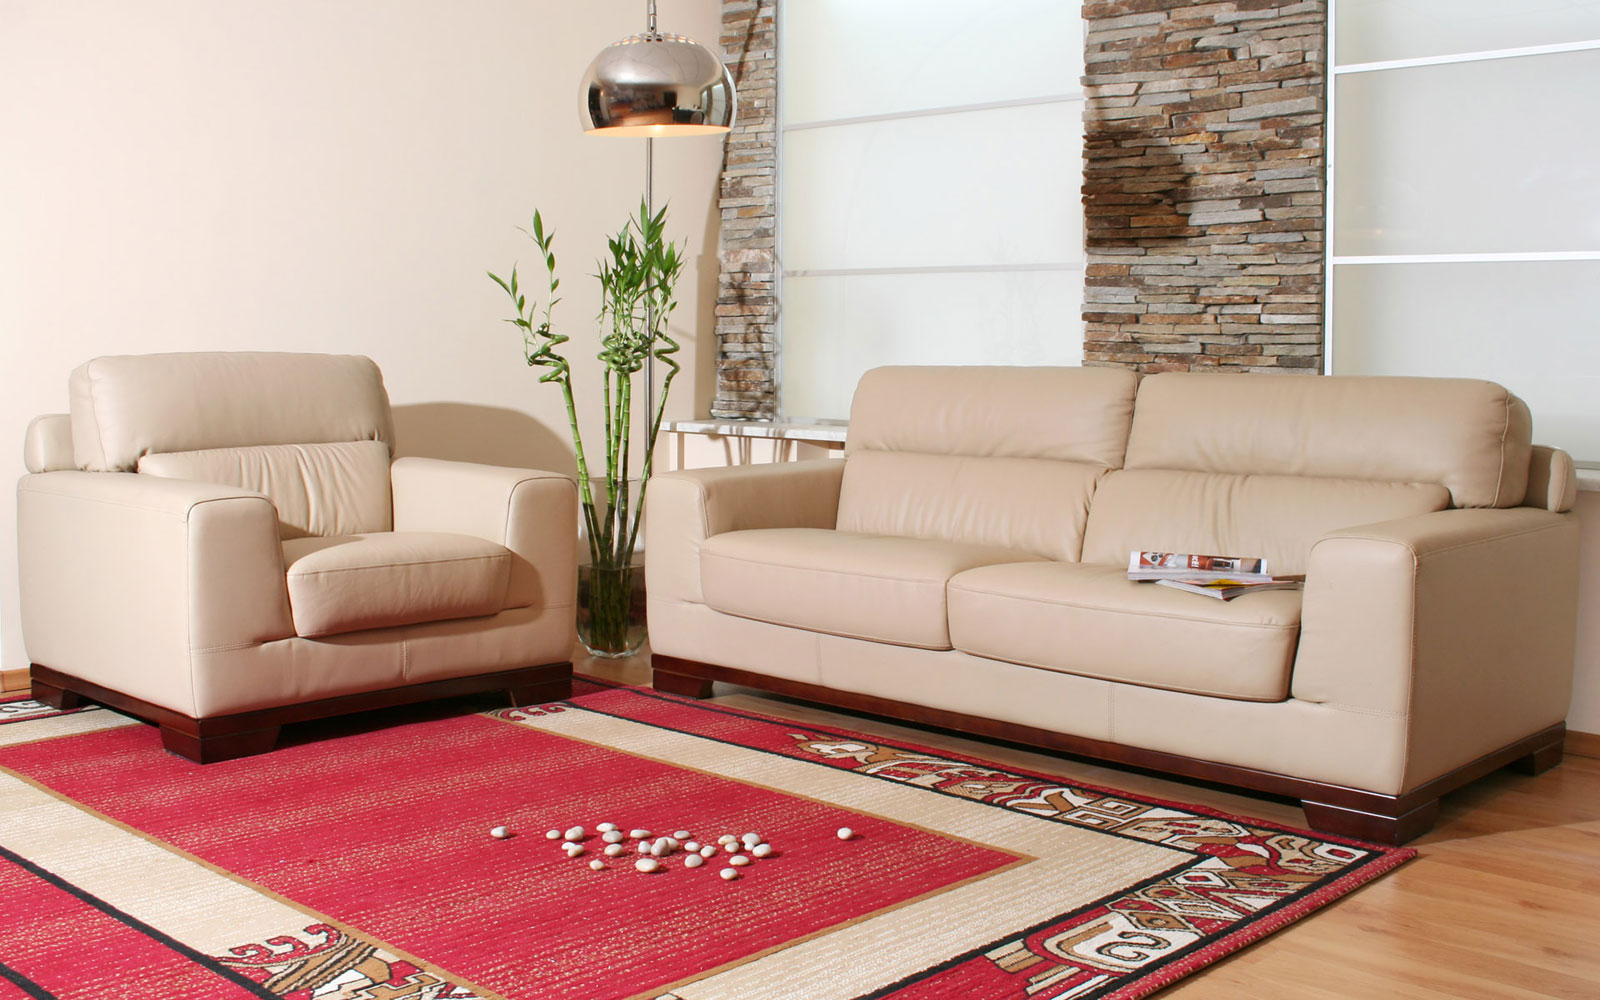 Loveseat And Living Astonishing Loveseat And Chairs Of Living Room Design With Red Rug Completed With Pendant Lighting And Furnished With Glass Vase For Green Plant Decoration Living Room Stylish And Simply Living Room Design